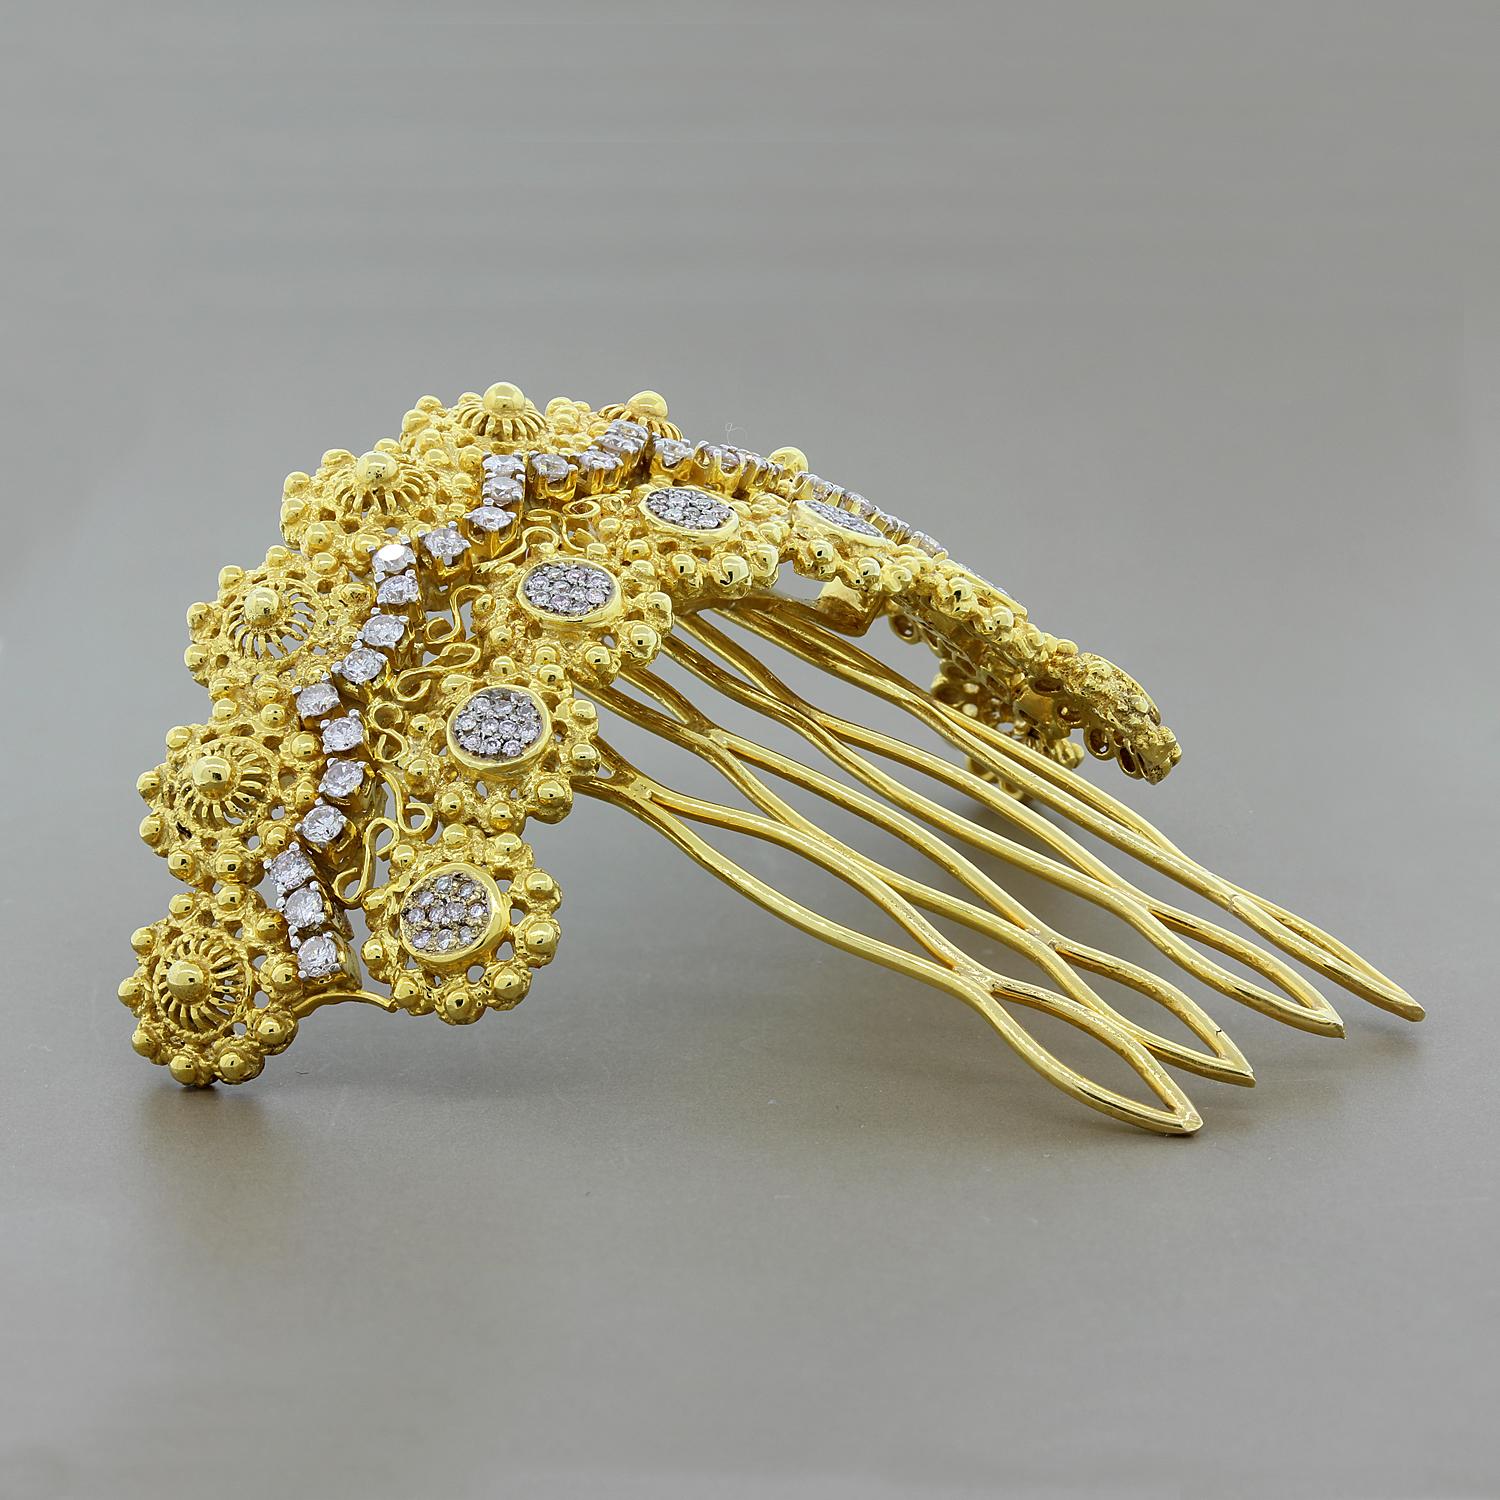 A handmade estate French hair comb from the early 1900’s. It is made of 18K yellow gold filigree work and beading and features 2 carats of round cut diamonds.  

Width: 2 ¾ inches
Height with Comb: 2 ½ inches
Height of Prongs: 2 inches
Height of